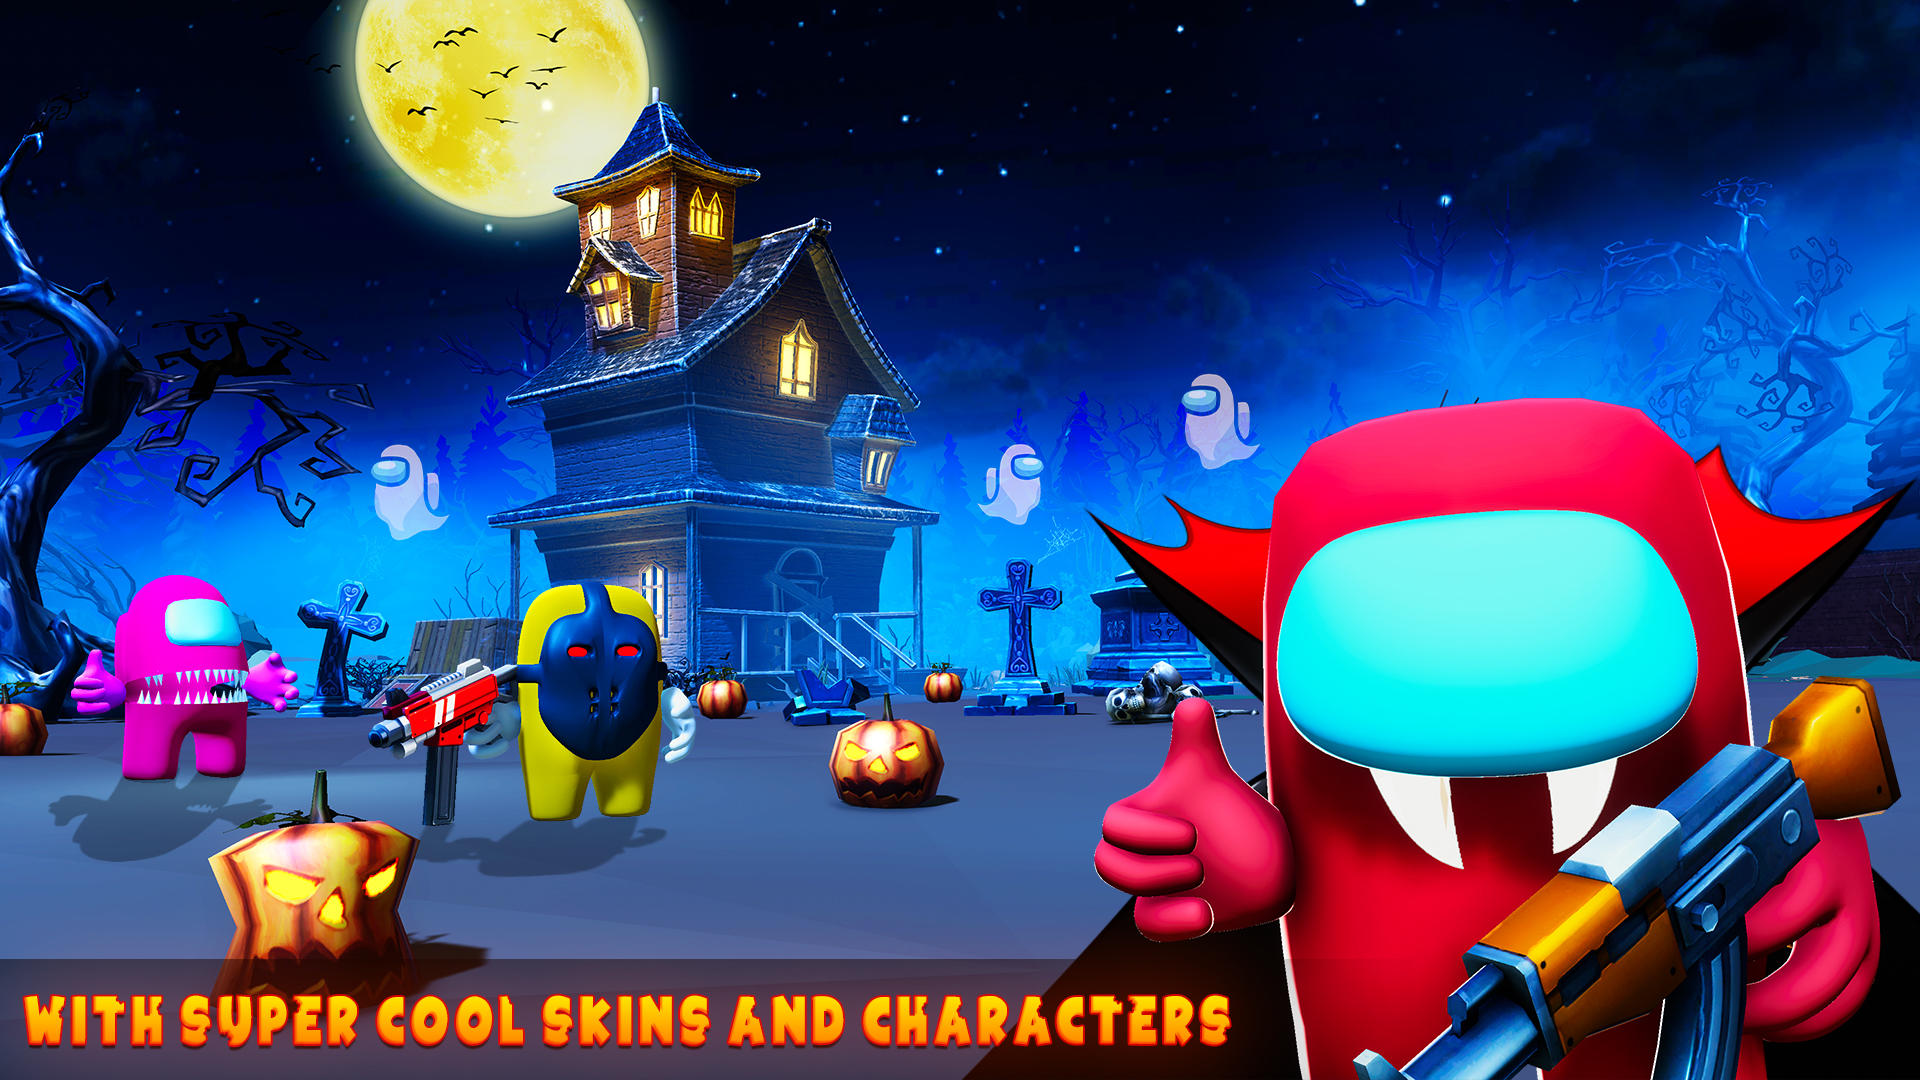 Imposter Battle Royale - Download & Play for Free Here